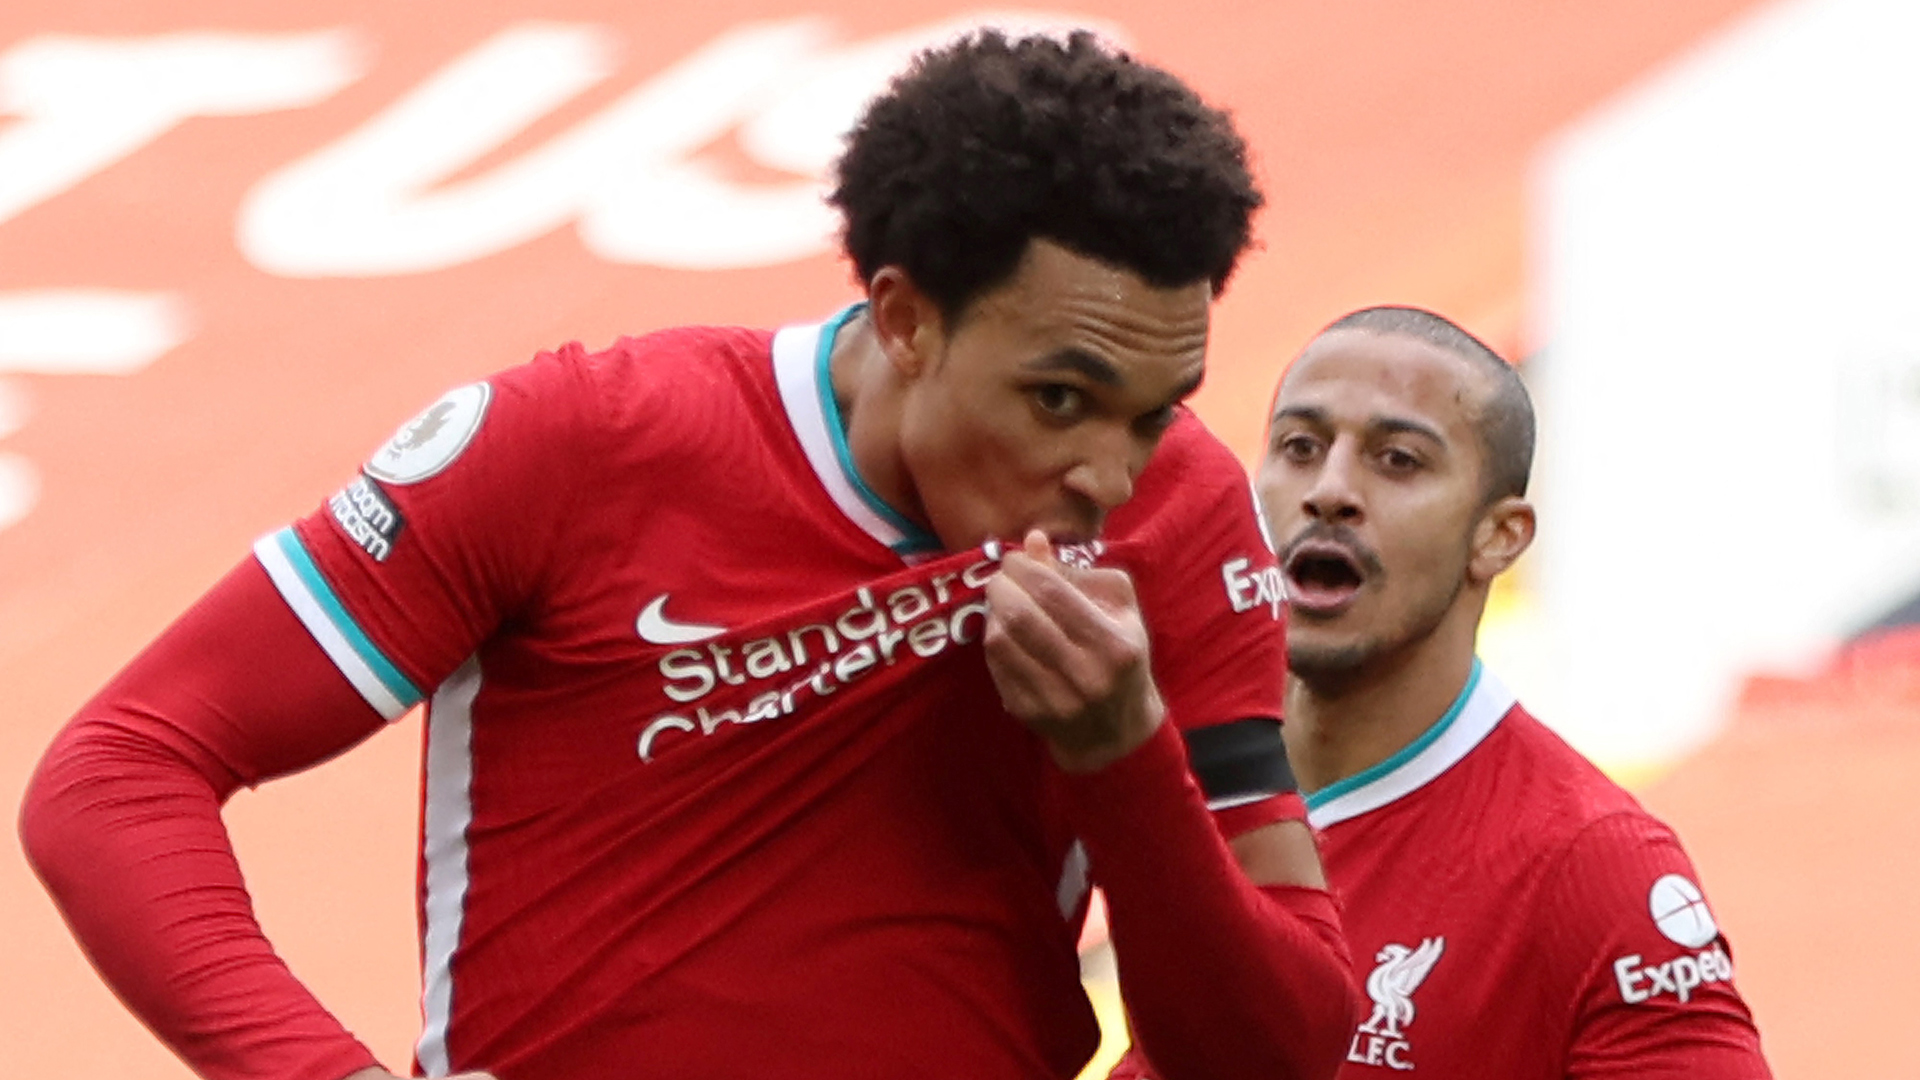 Are you not entertained?!' - Alexander-Arnold's priceless reaction after Liverpool winner | Goal.com